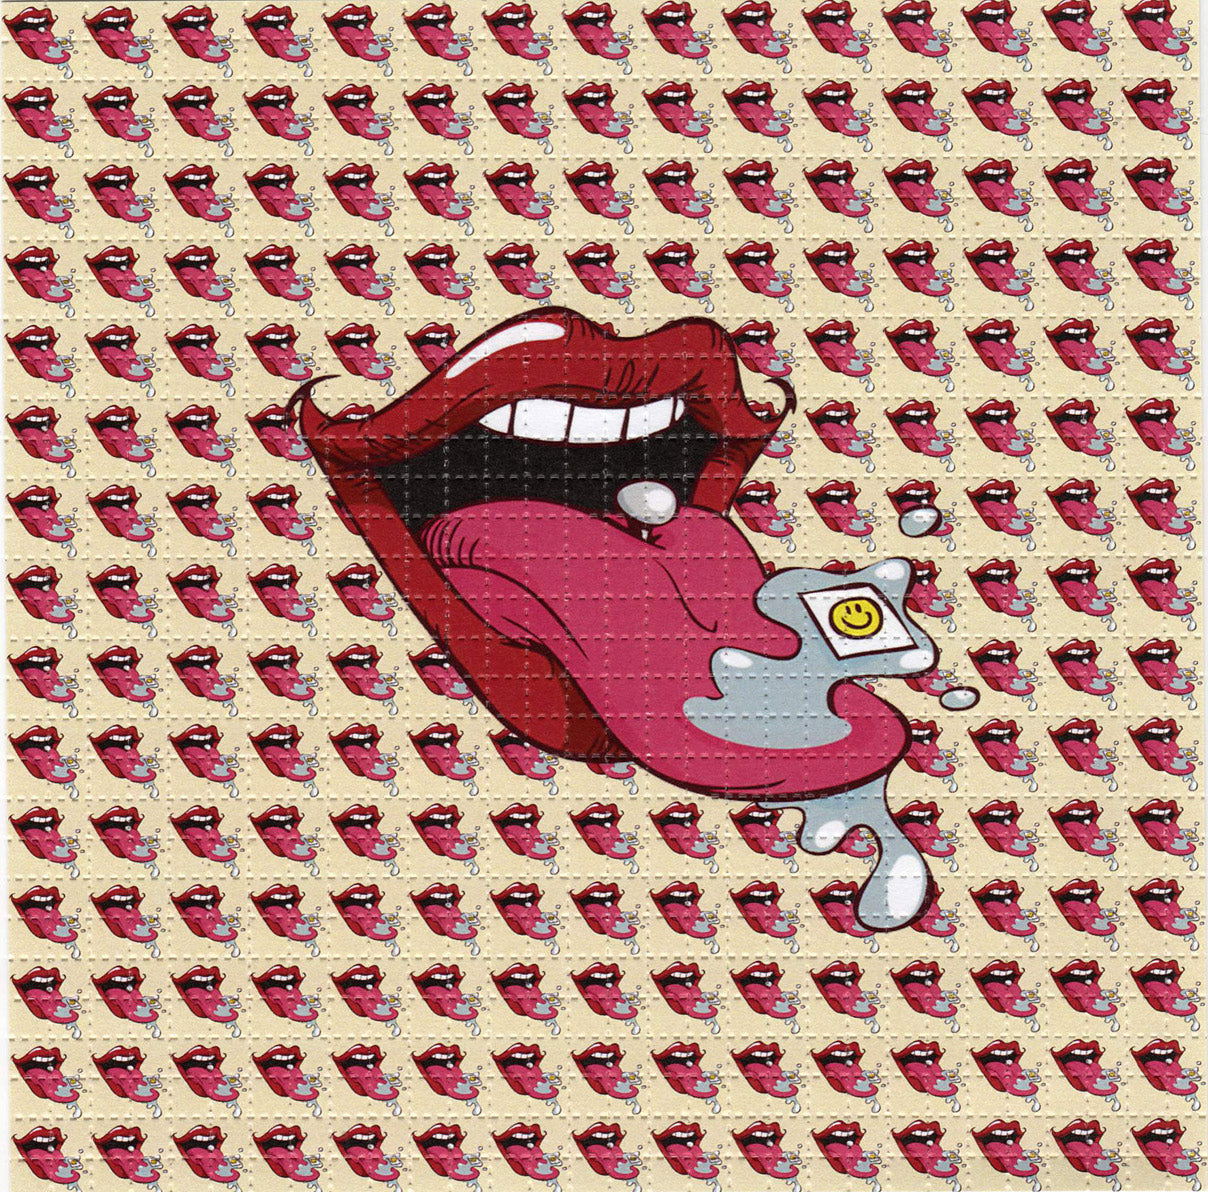 A Tab for Every Tongue LSD blotter art print